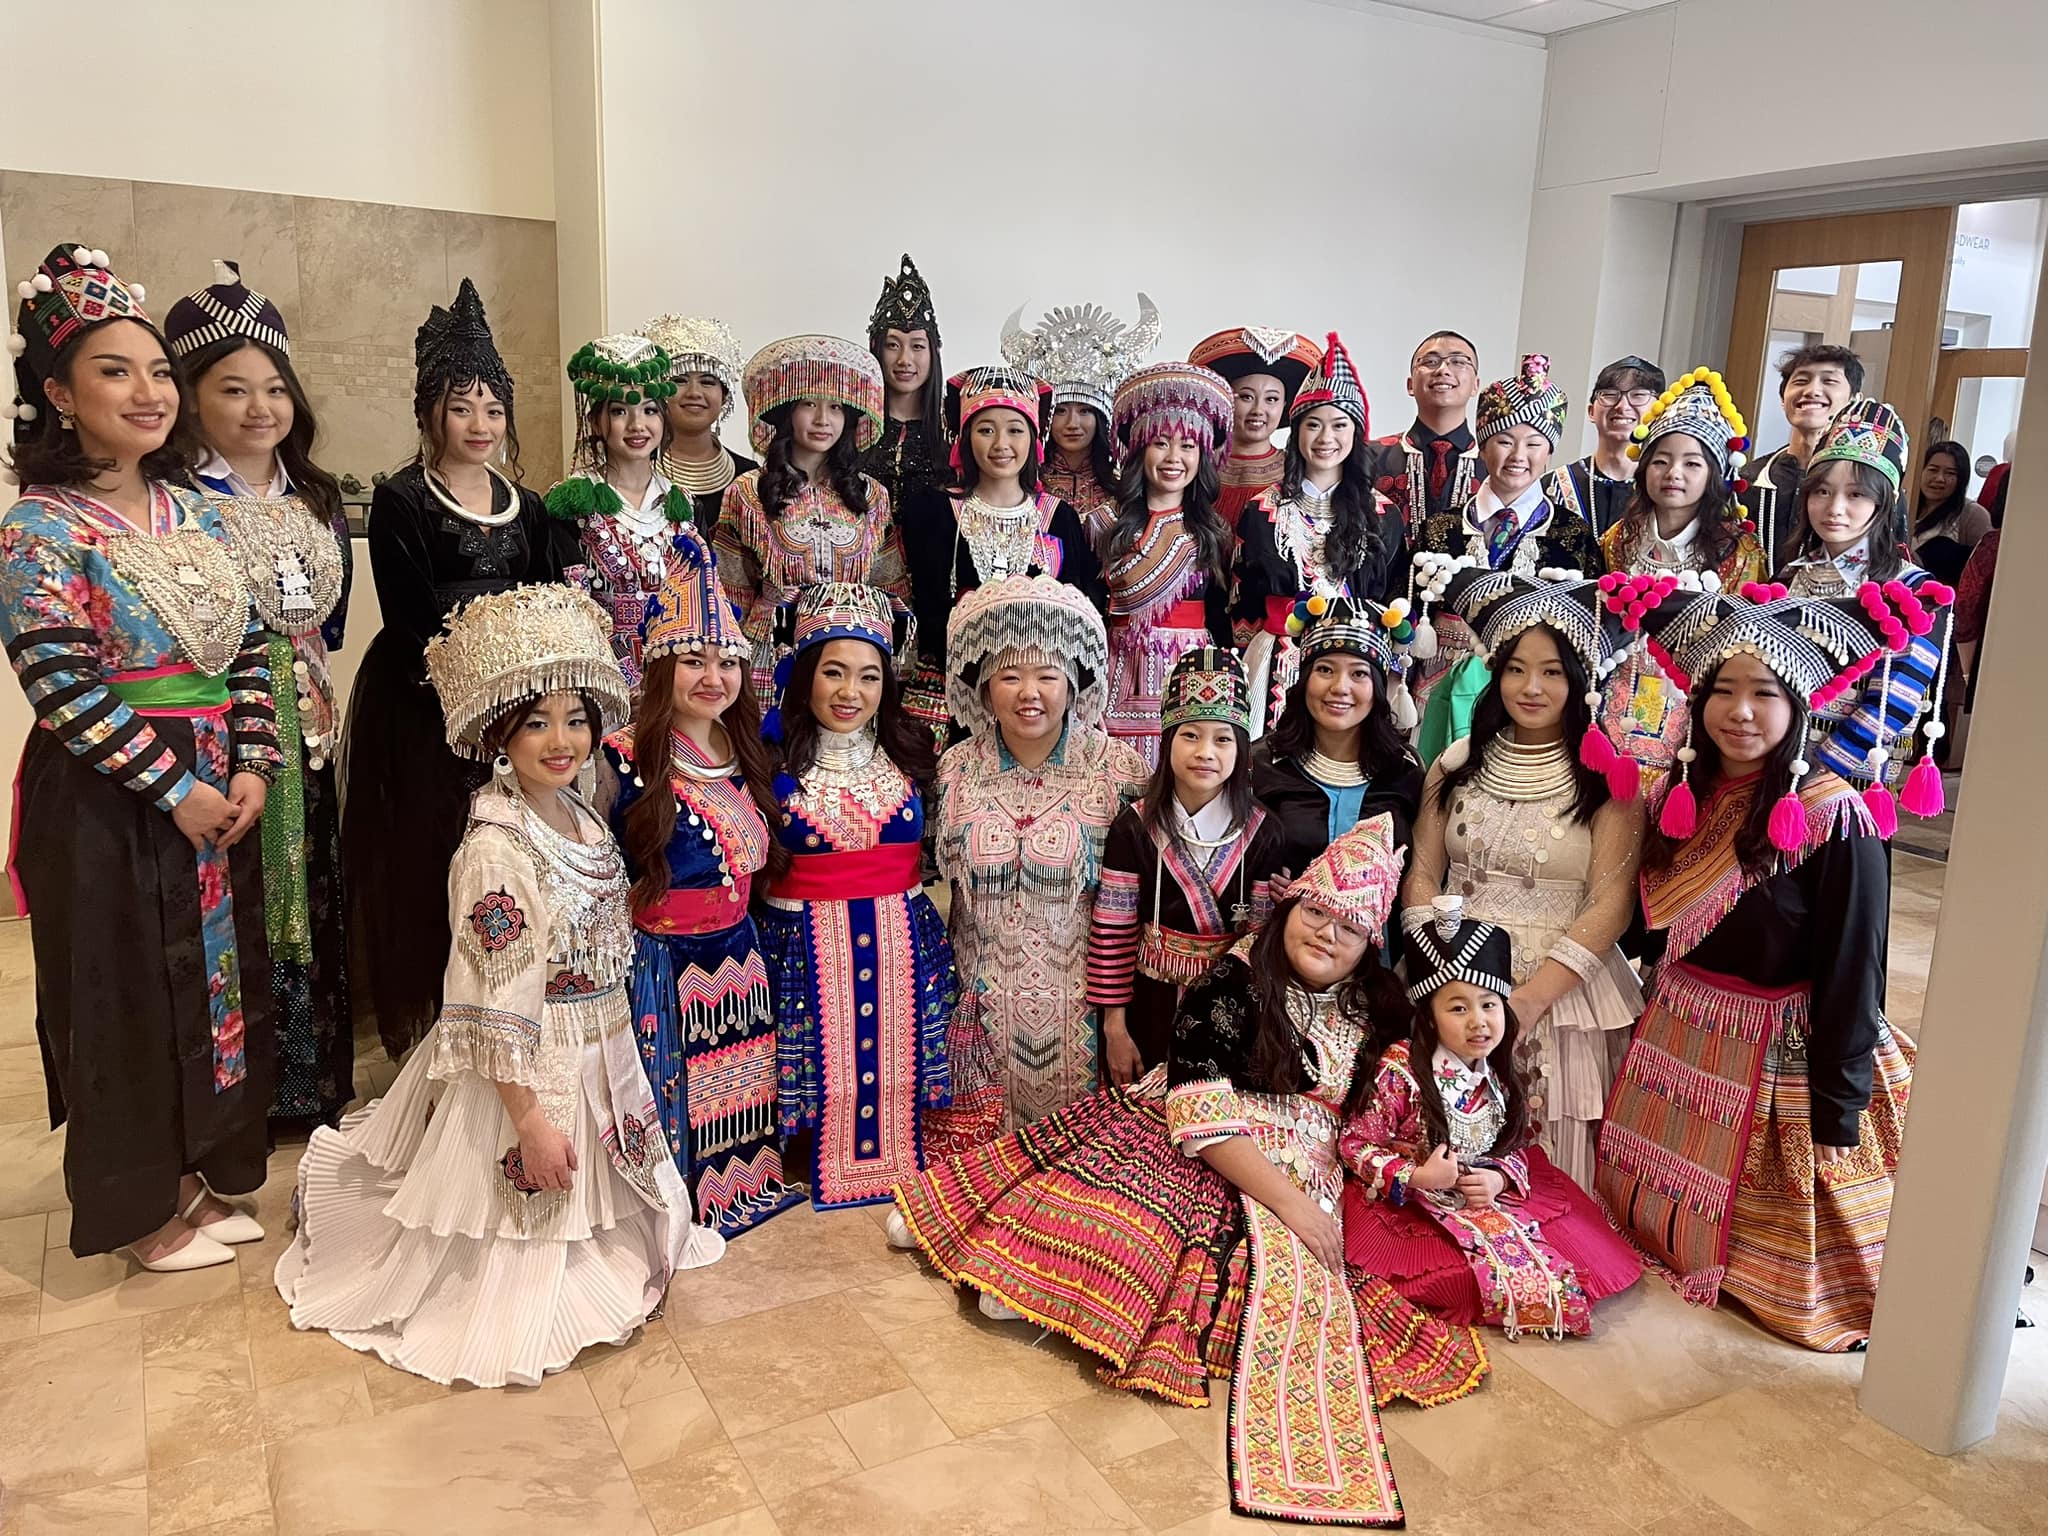 29 volunteer models wearing traditional Hmong clothing with ornate beadwork, colors, and patterns